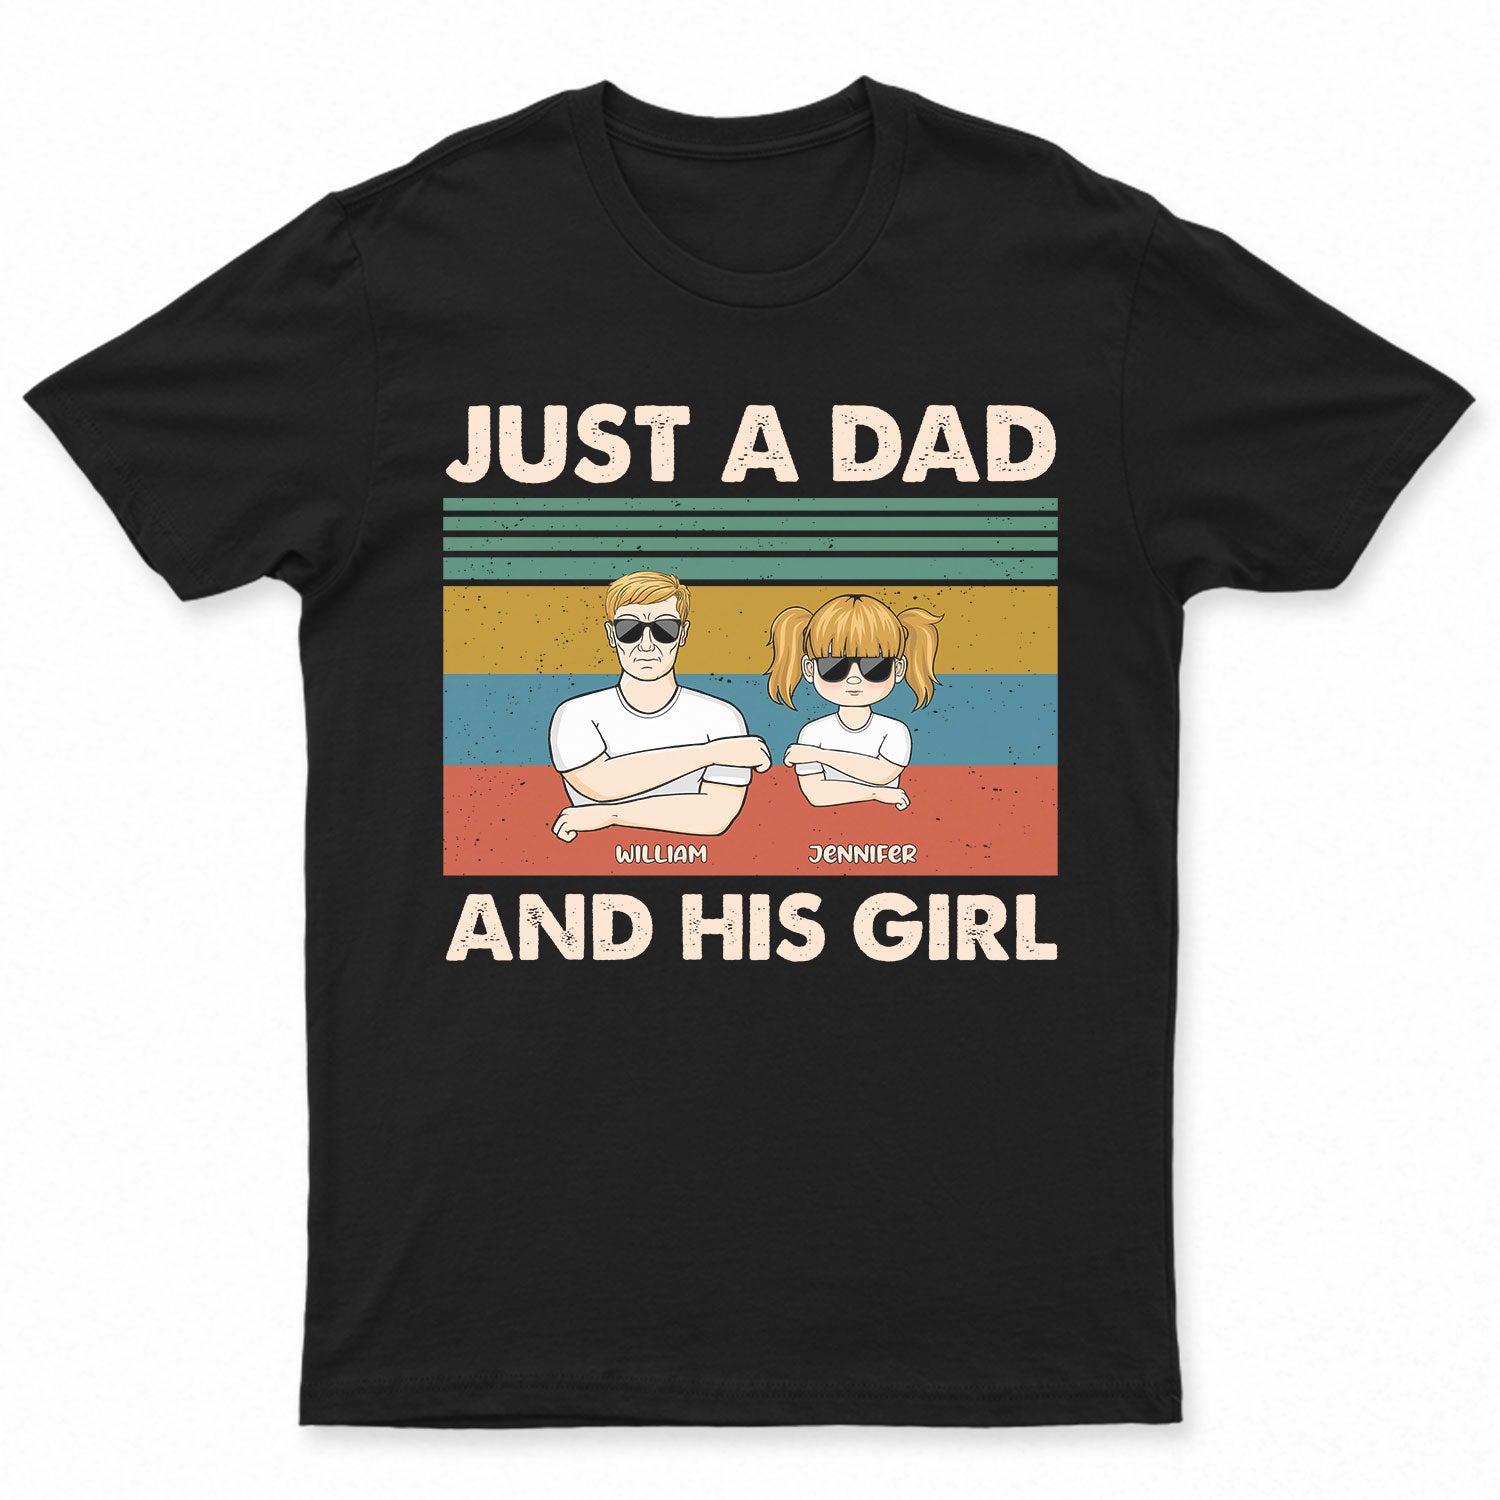 Just A Dad And His Girl - Gift For Father - Personalized Custom T Shirt